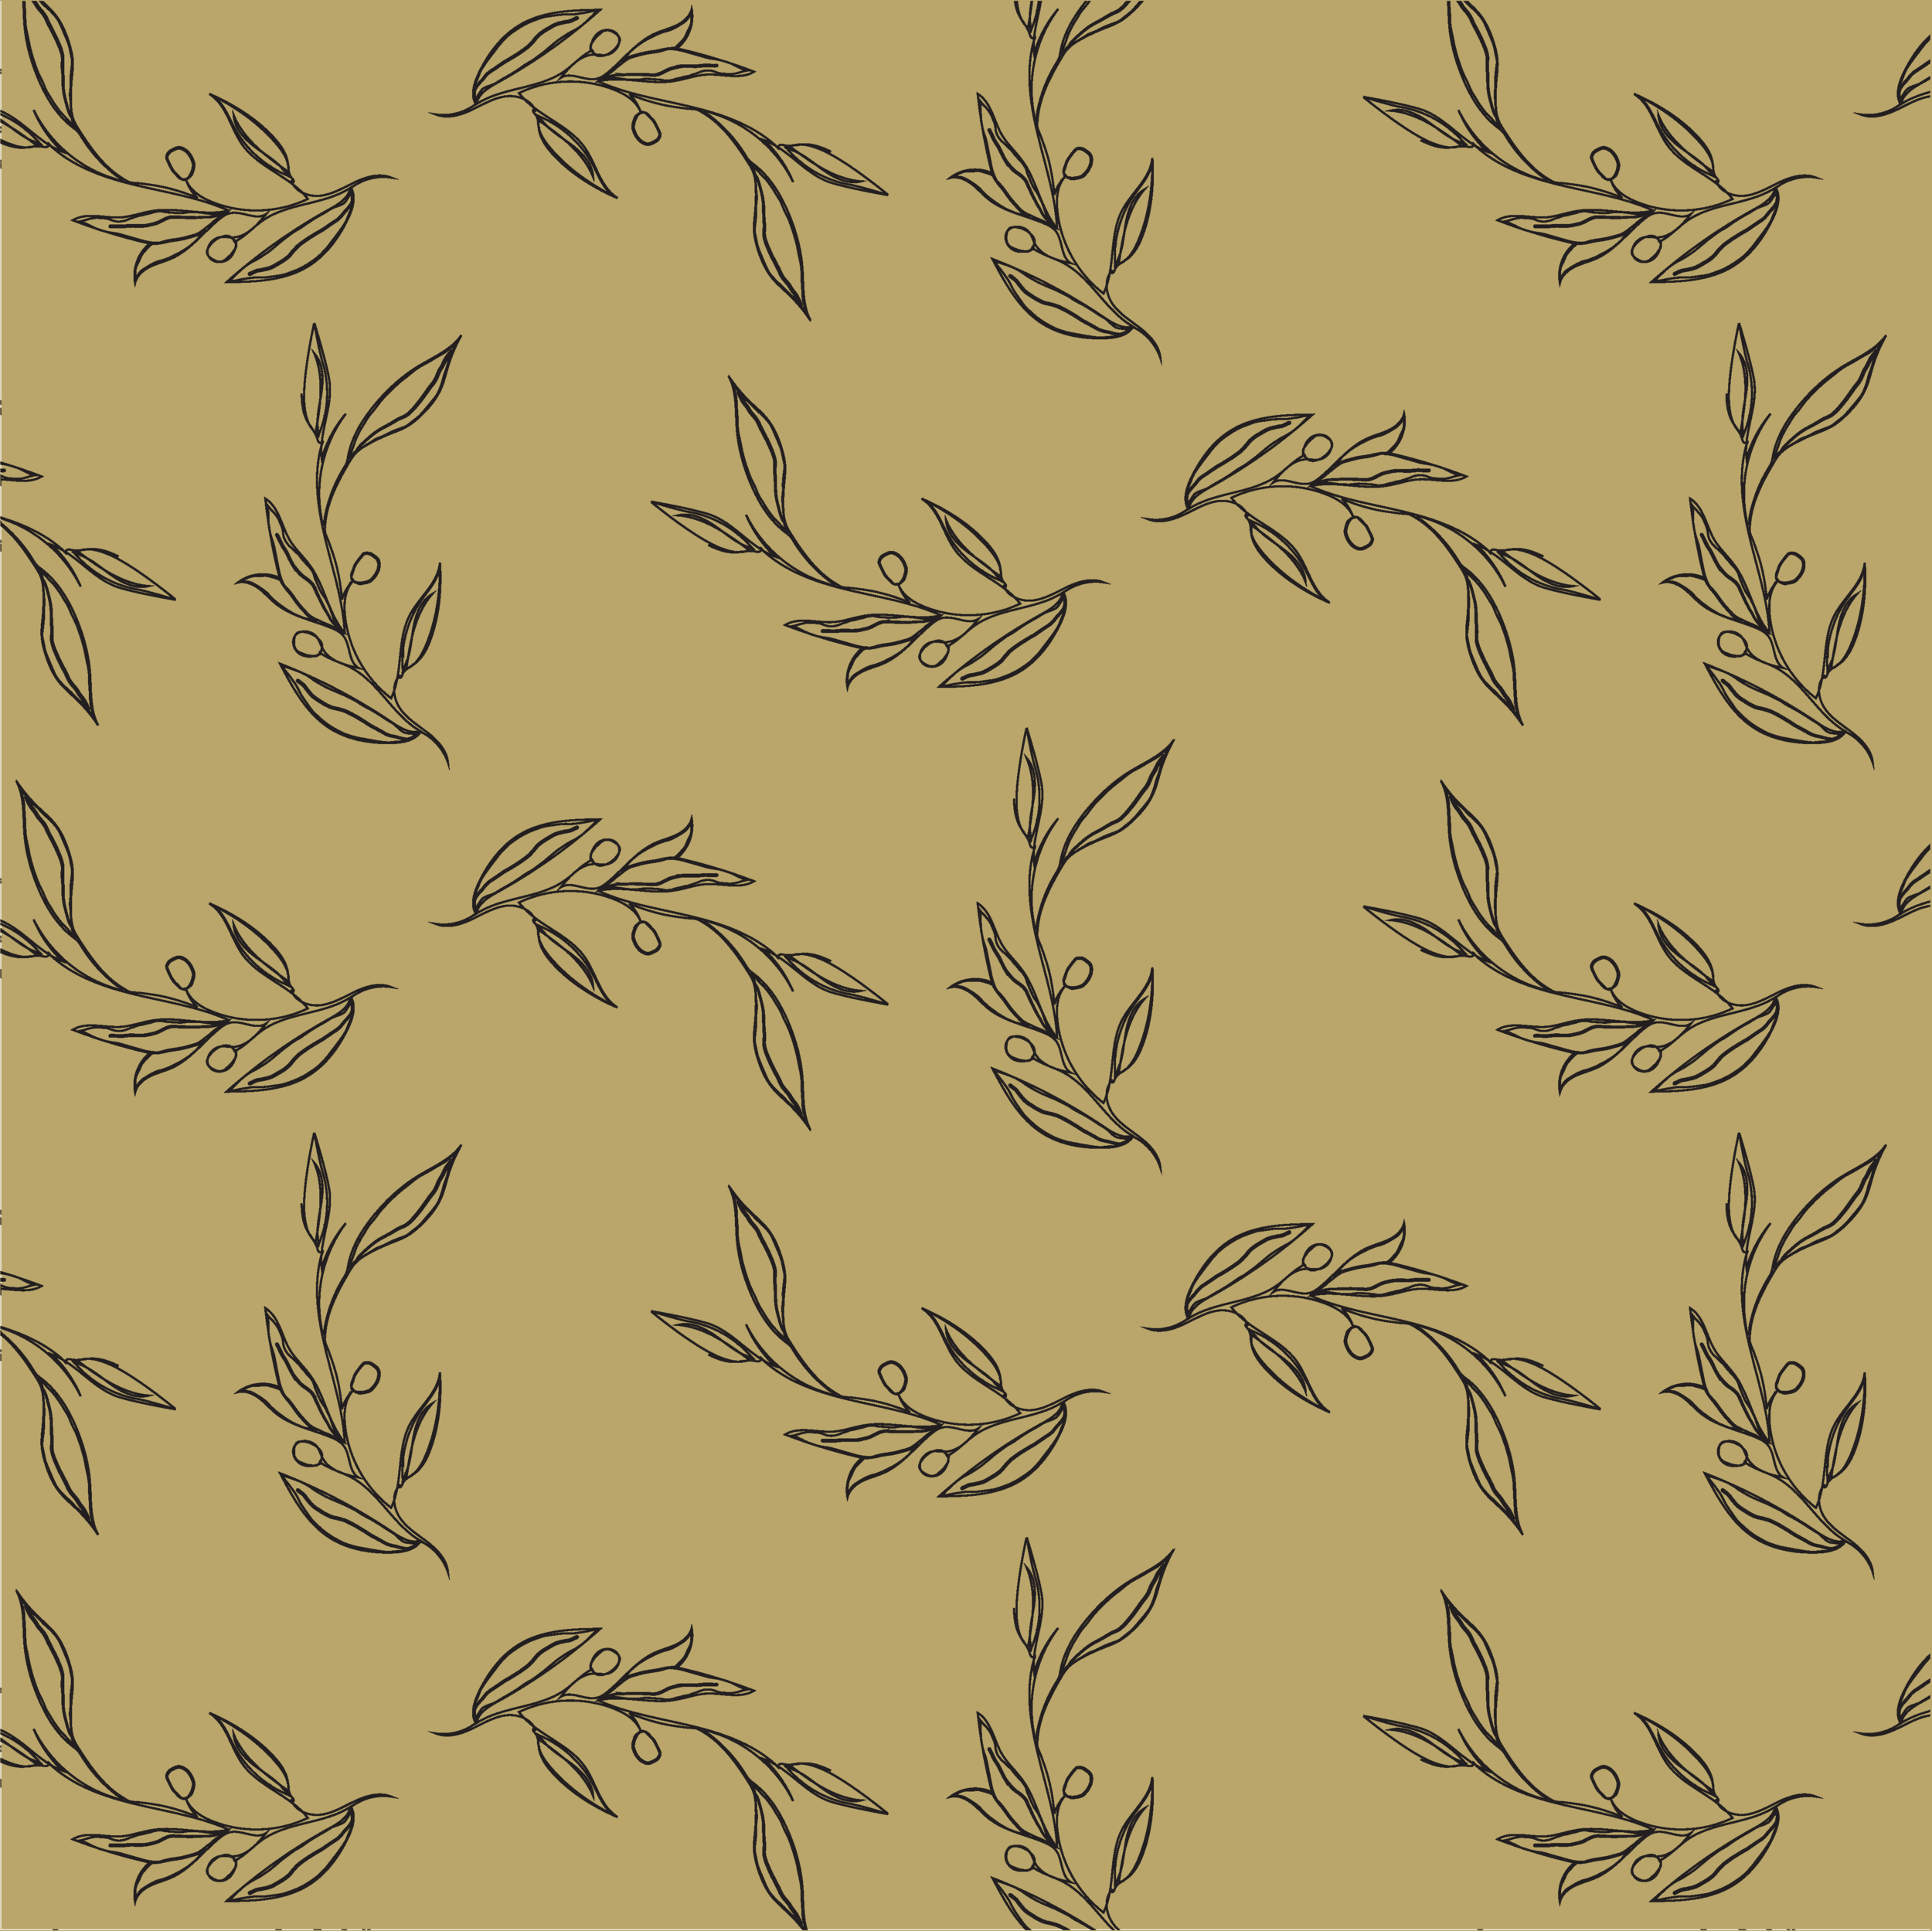 the-olive-project-_Artboard 26-olive-pattern-gold-background.png